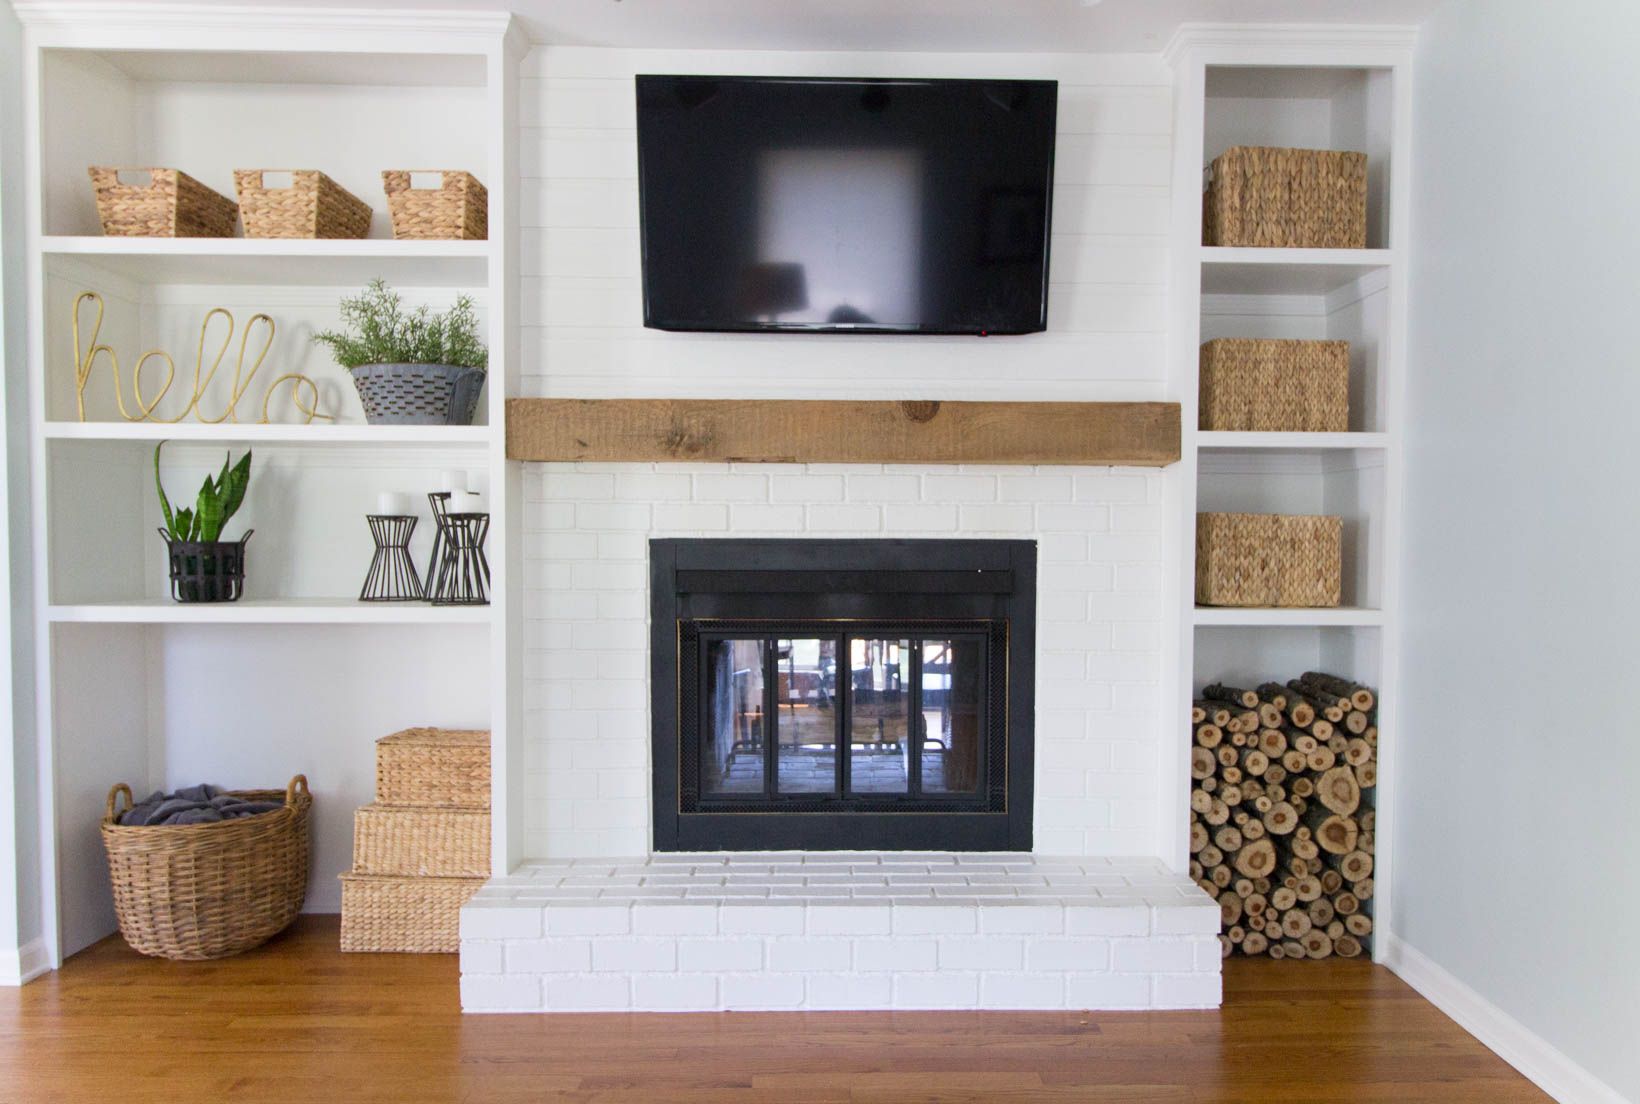 How to Brick A Fireplace New Built In Shelves Around Shallow Depth Brick Fireplace